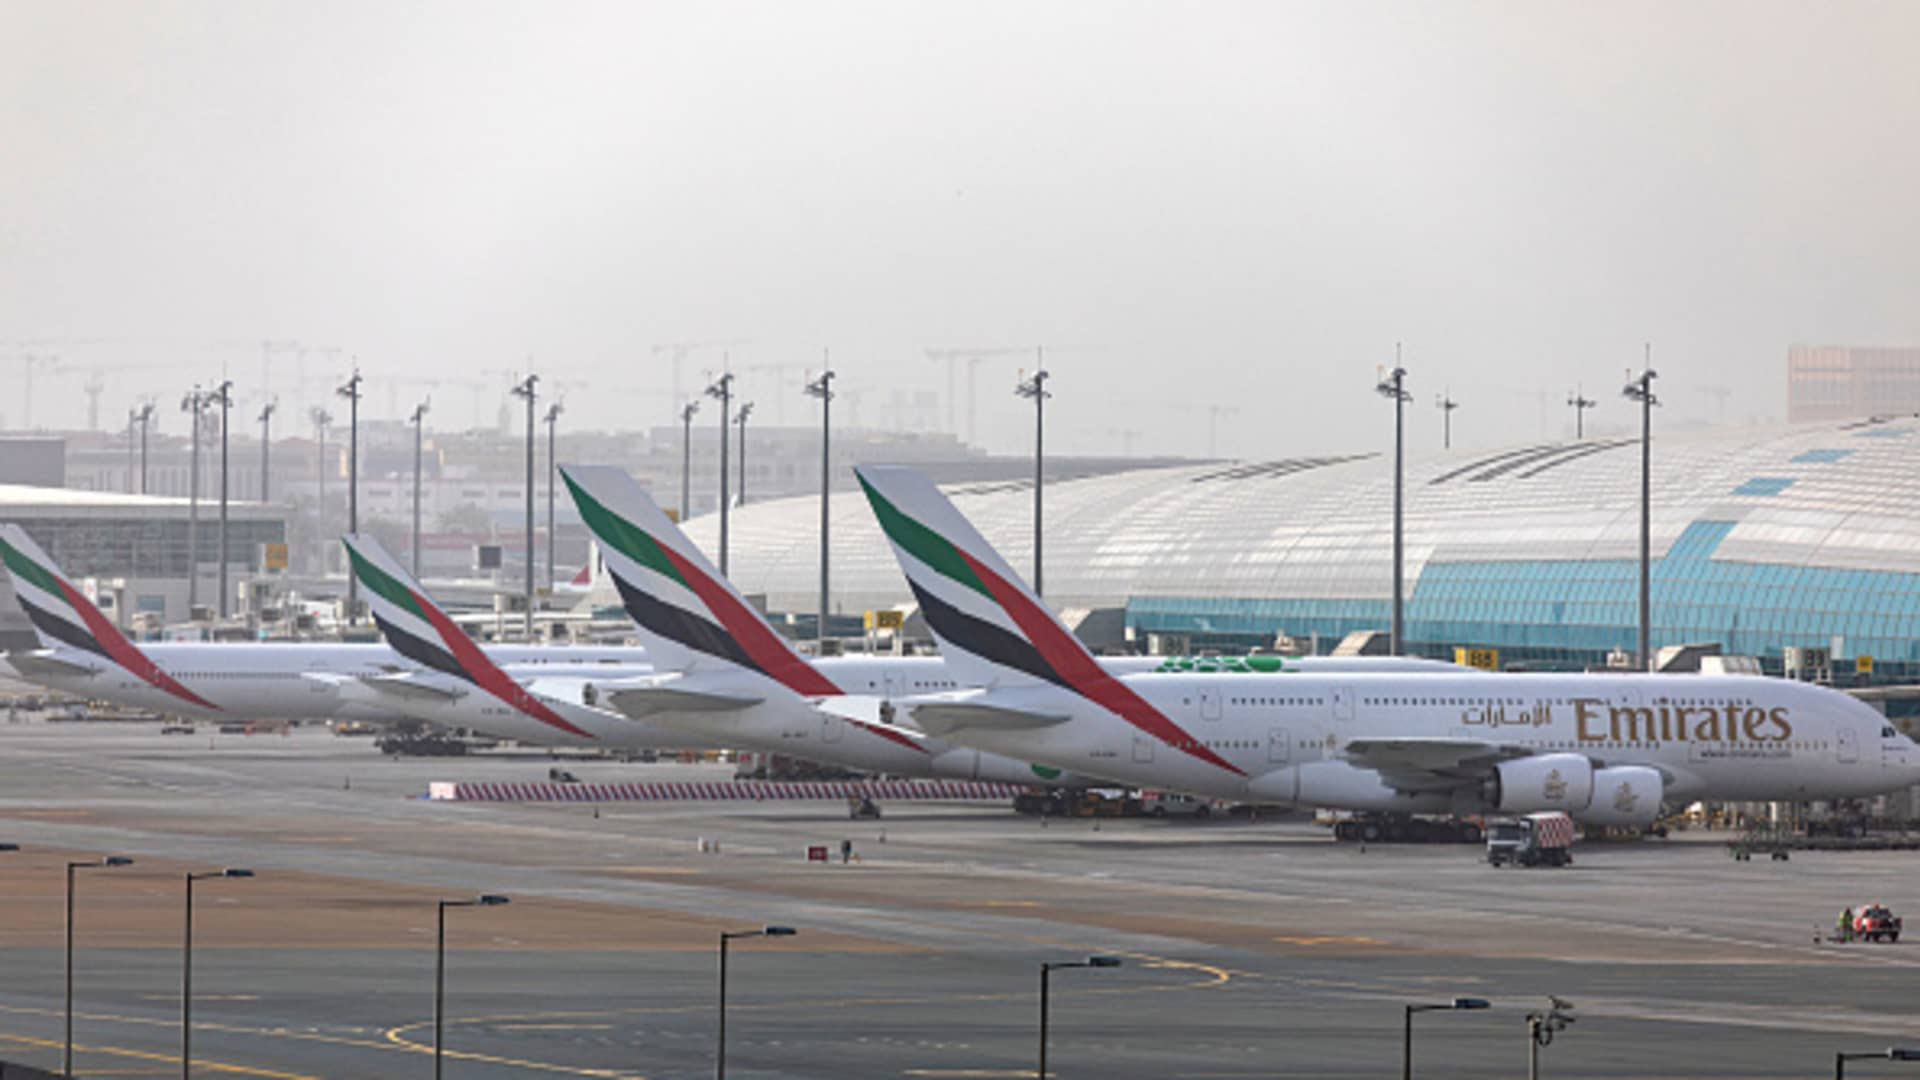 Emirates Airline, stung by soaring fuel prices, posts $1.1 billion dollar loss